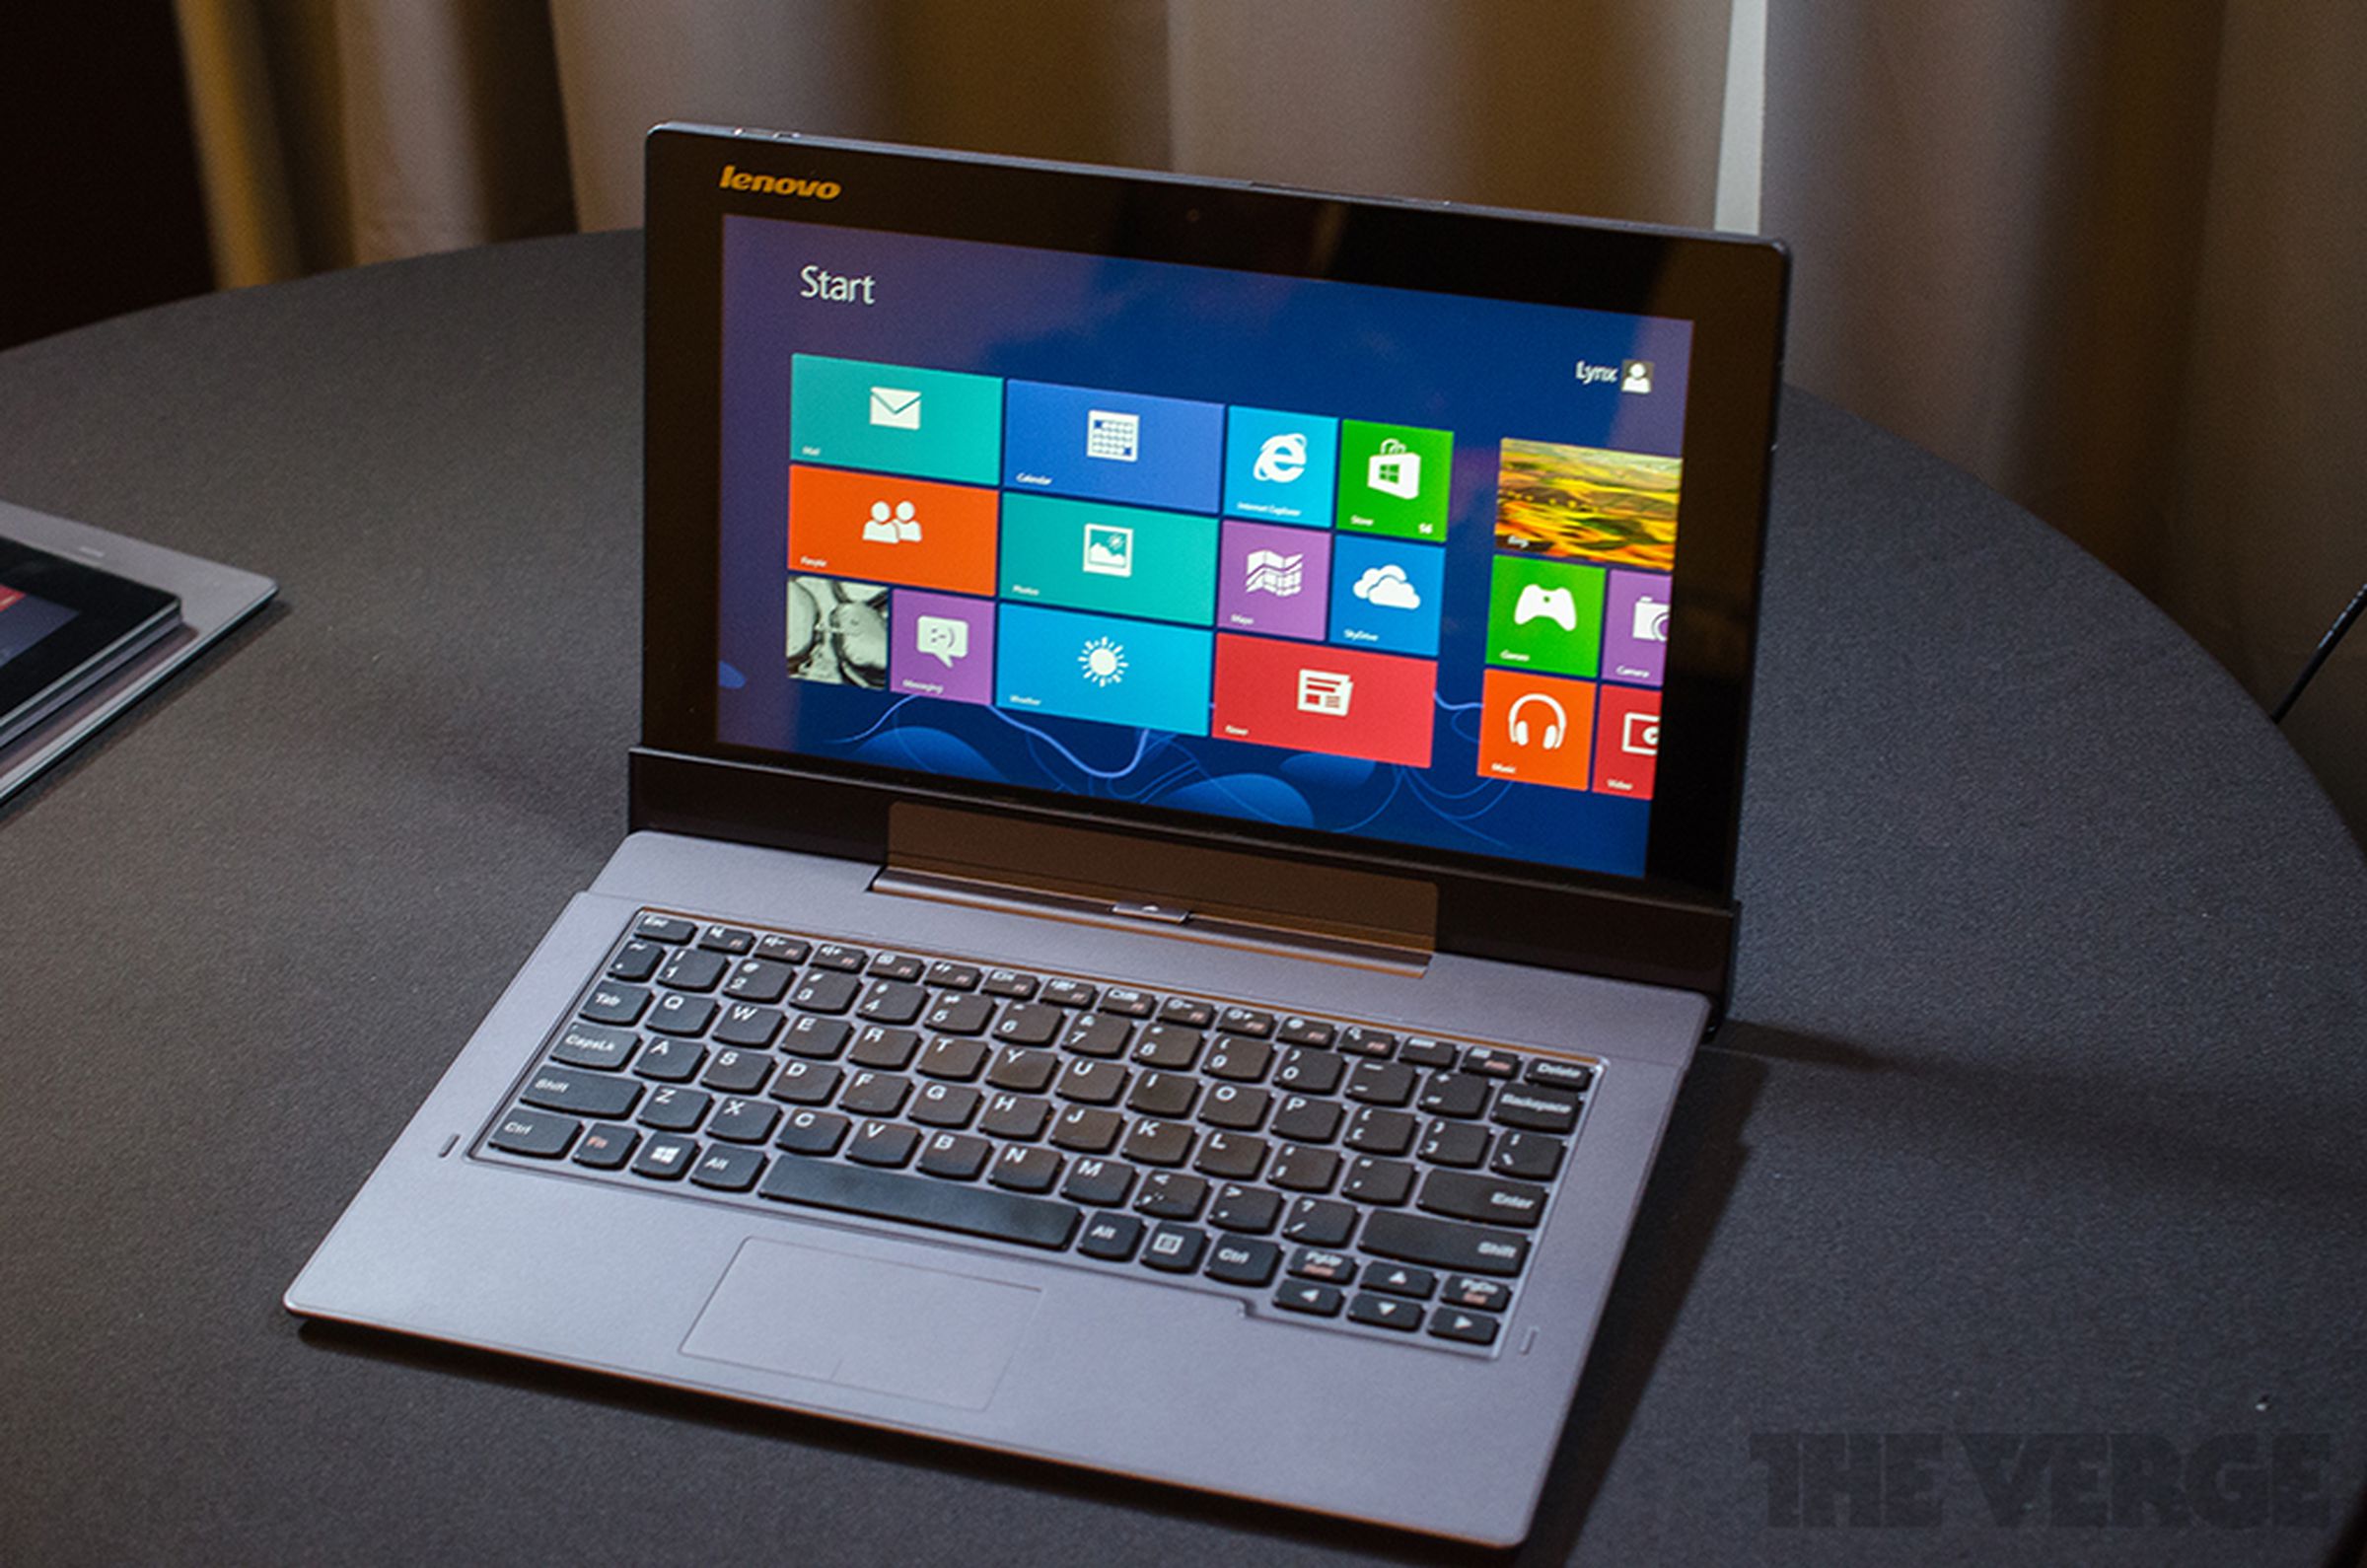 Lenovo IdeaTab Lynx hands-on pictures